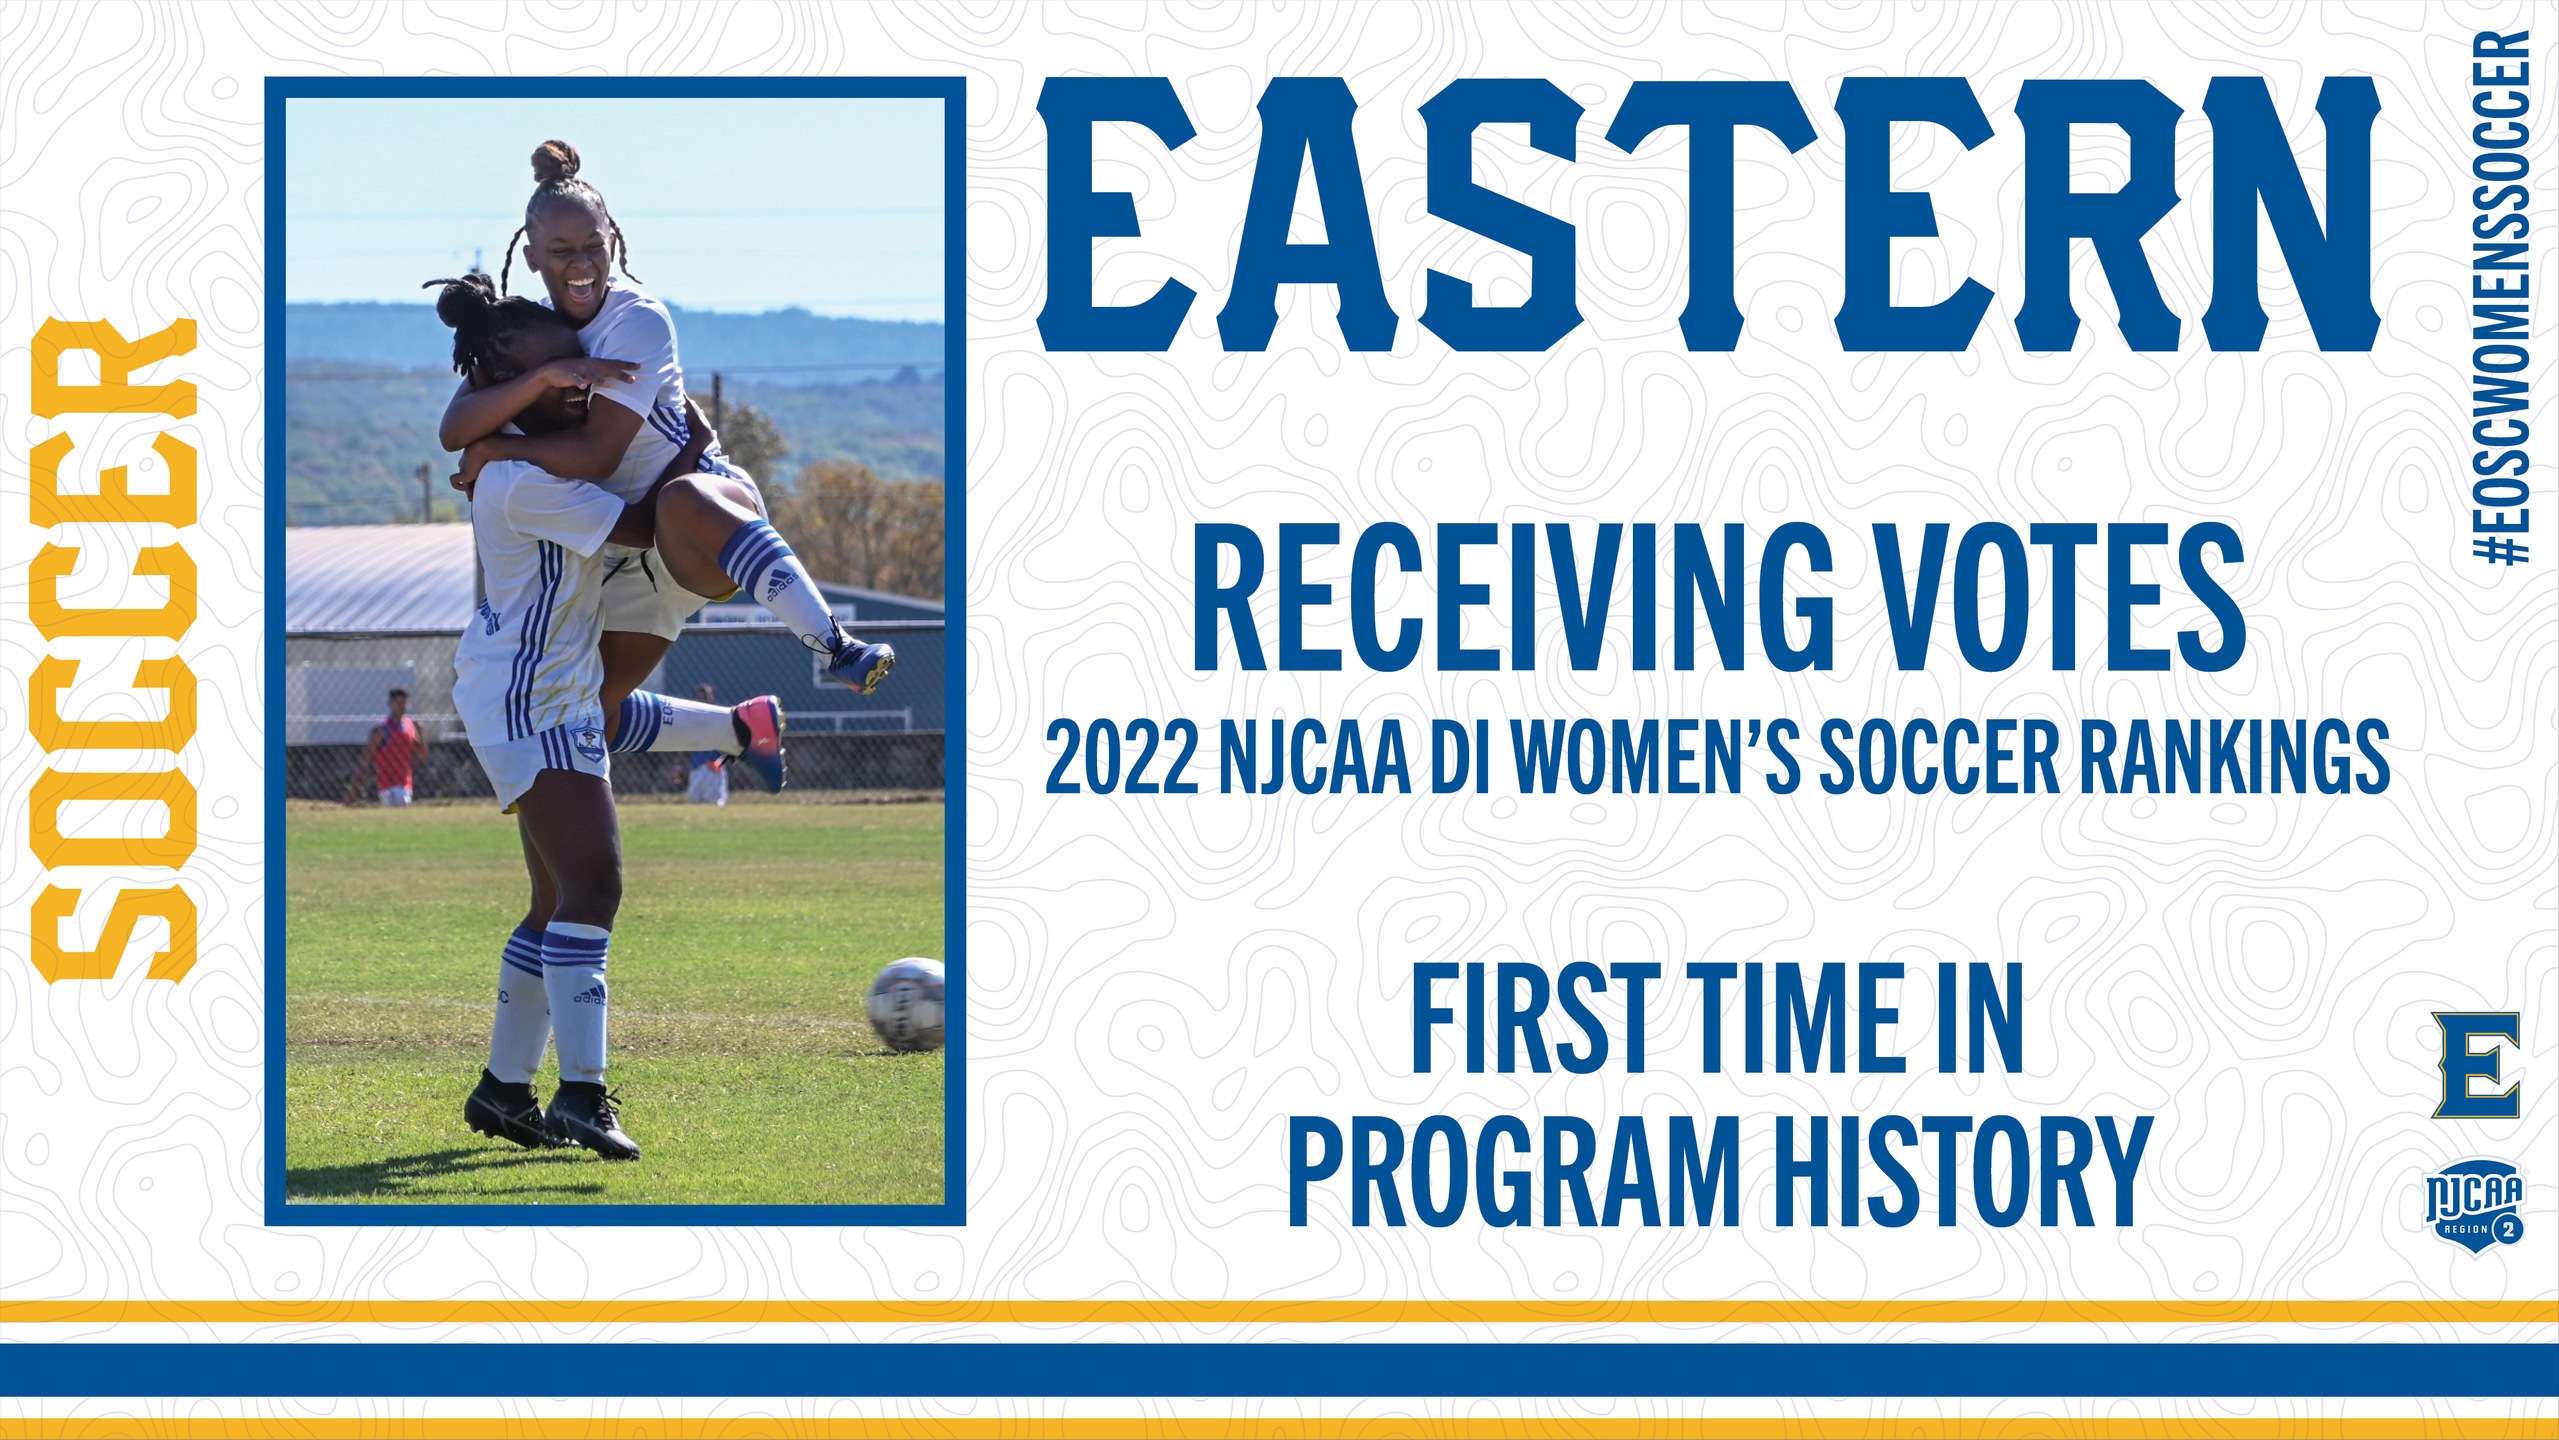 Women&rsquo;s Soccer Receiving Votes for First Time in Program History